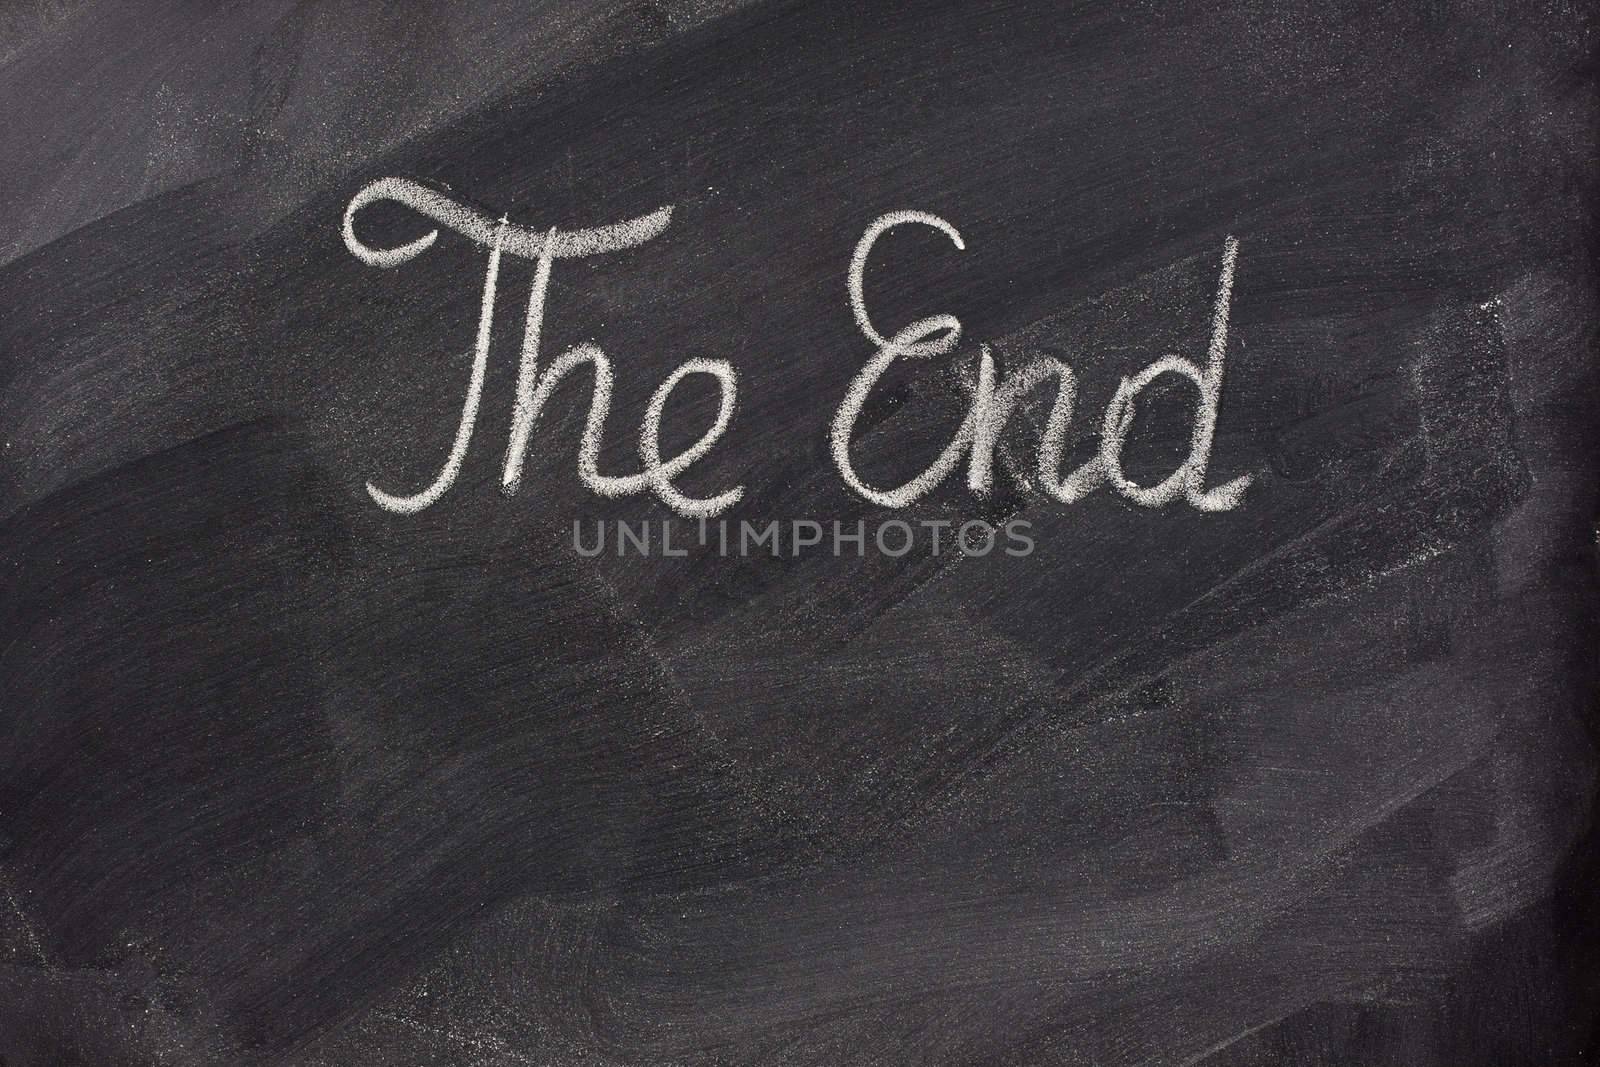 The end - handwritten with white chalk on blackboard with eraser smudges